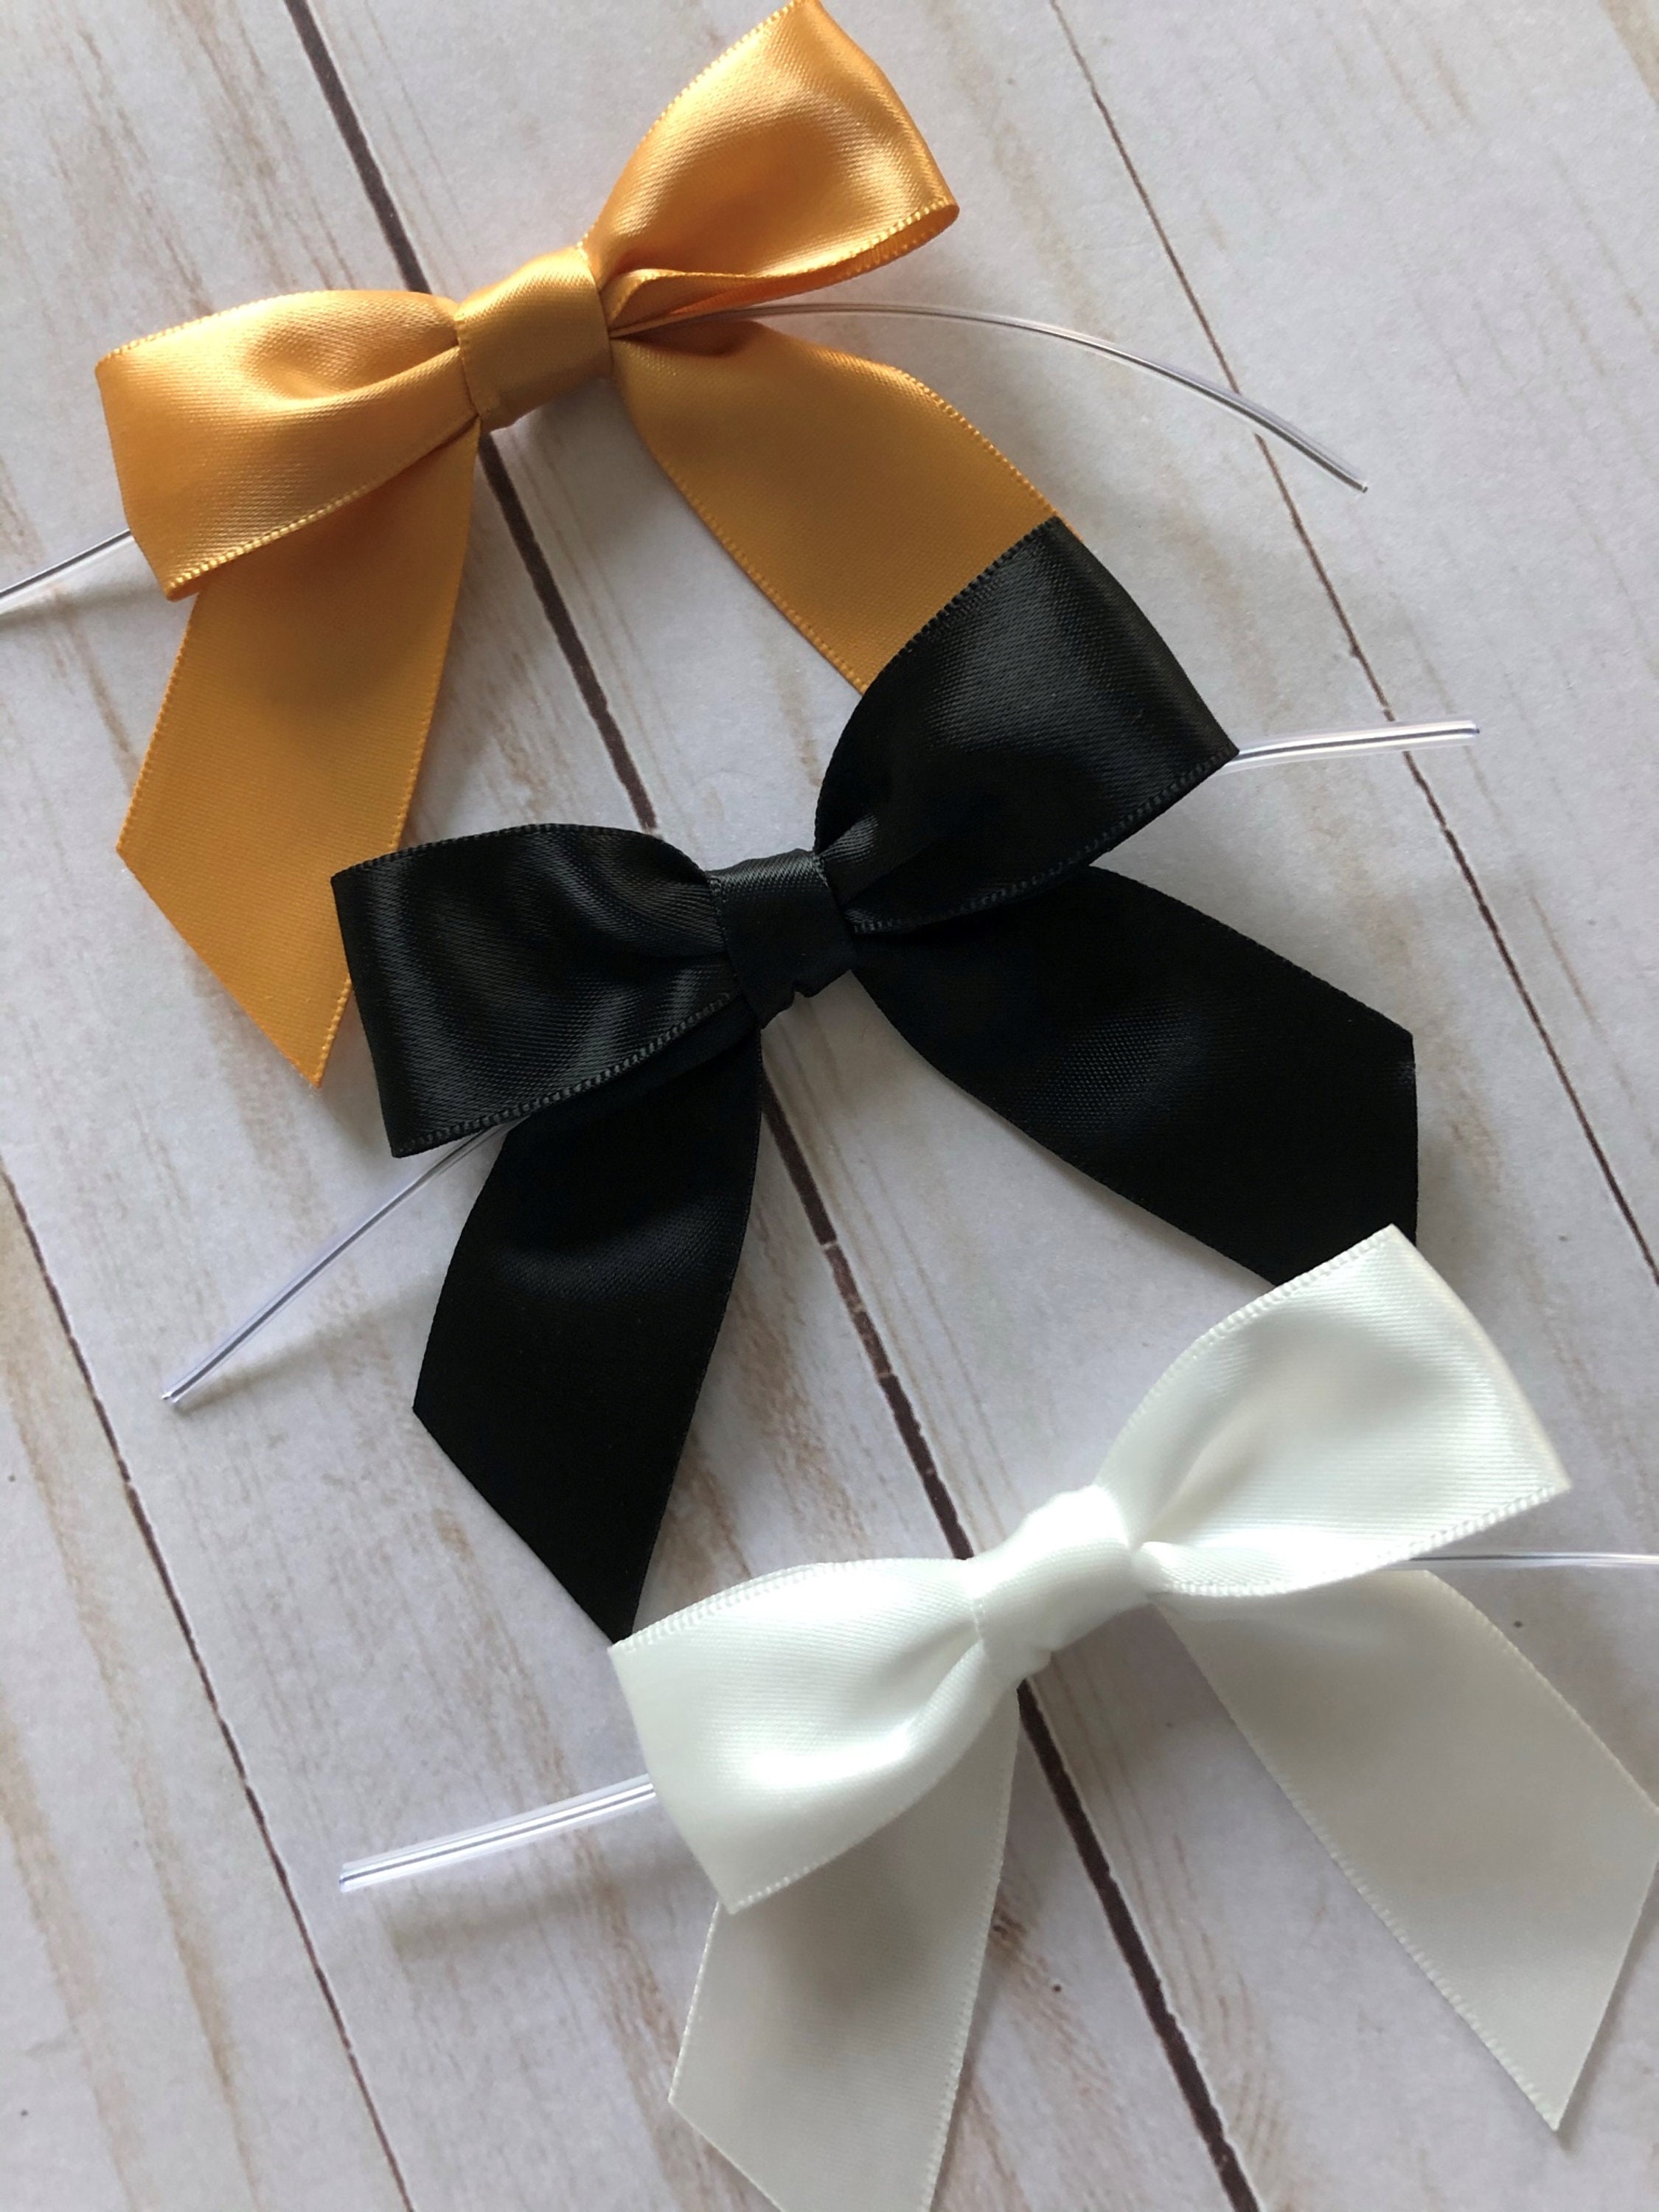  Gold Twist Tie Bow, 30 Pack Small Bows for Crafts, Christmas Gold  Bows for Gift Wrapping, Mini Pretied Satin Ribbon Bows, Twist Tie Bows for  Treat Bags Premade Tiny Bows for